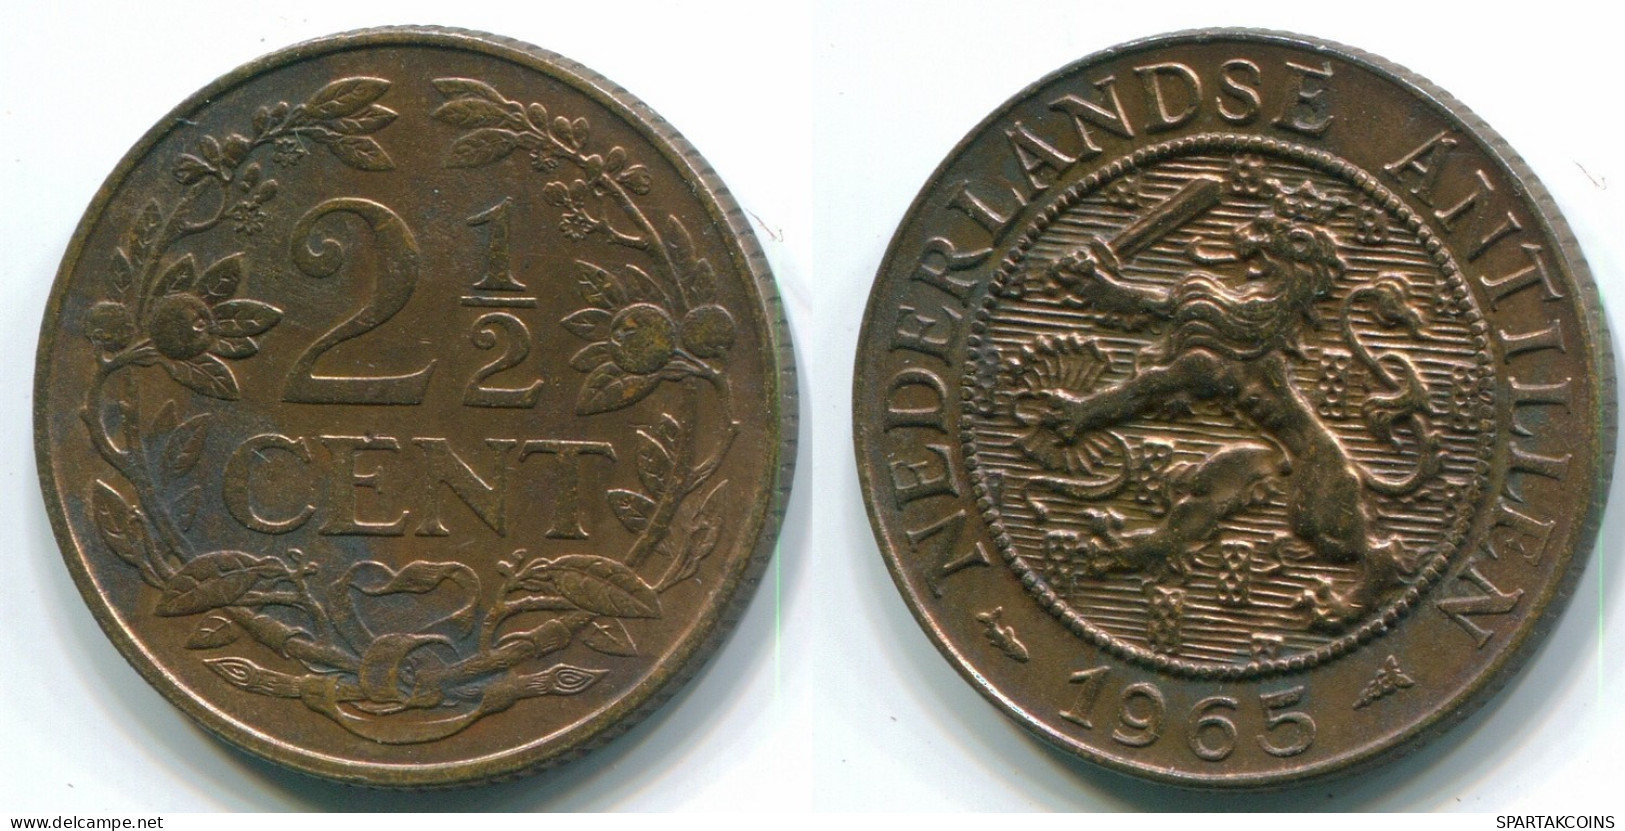 2 1/2 CENT 1965 CURACAO Netherlands Bronze Colonial Coin #S10210.U.A - Curacao